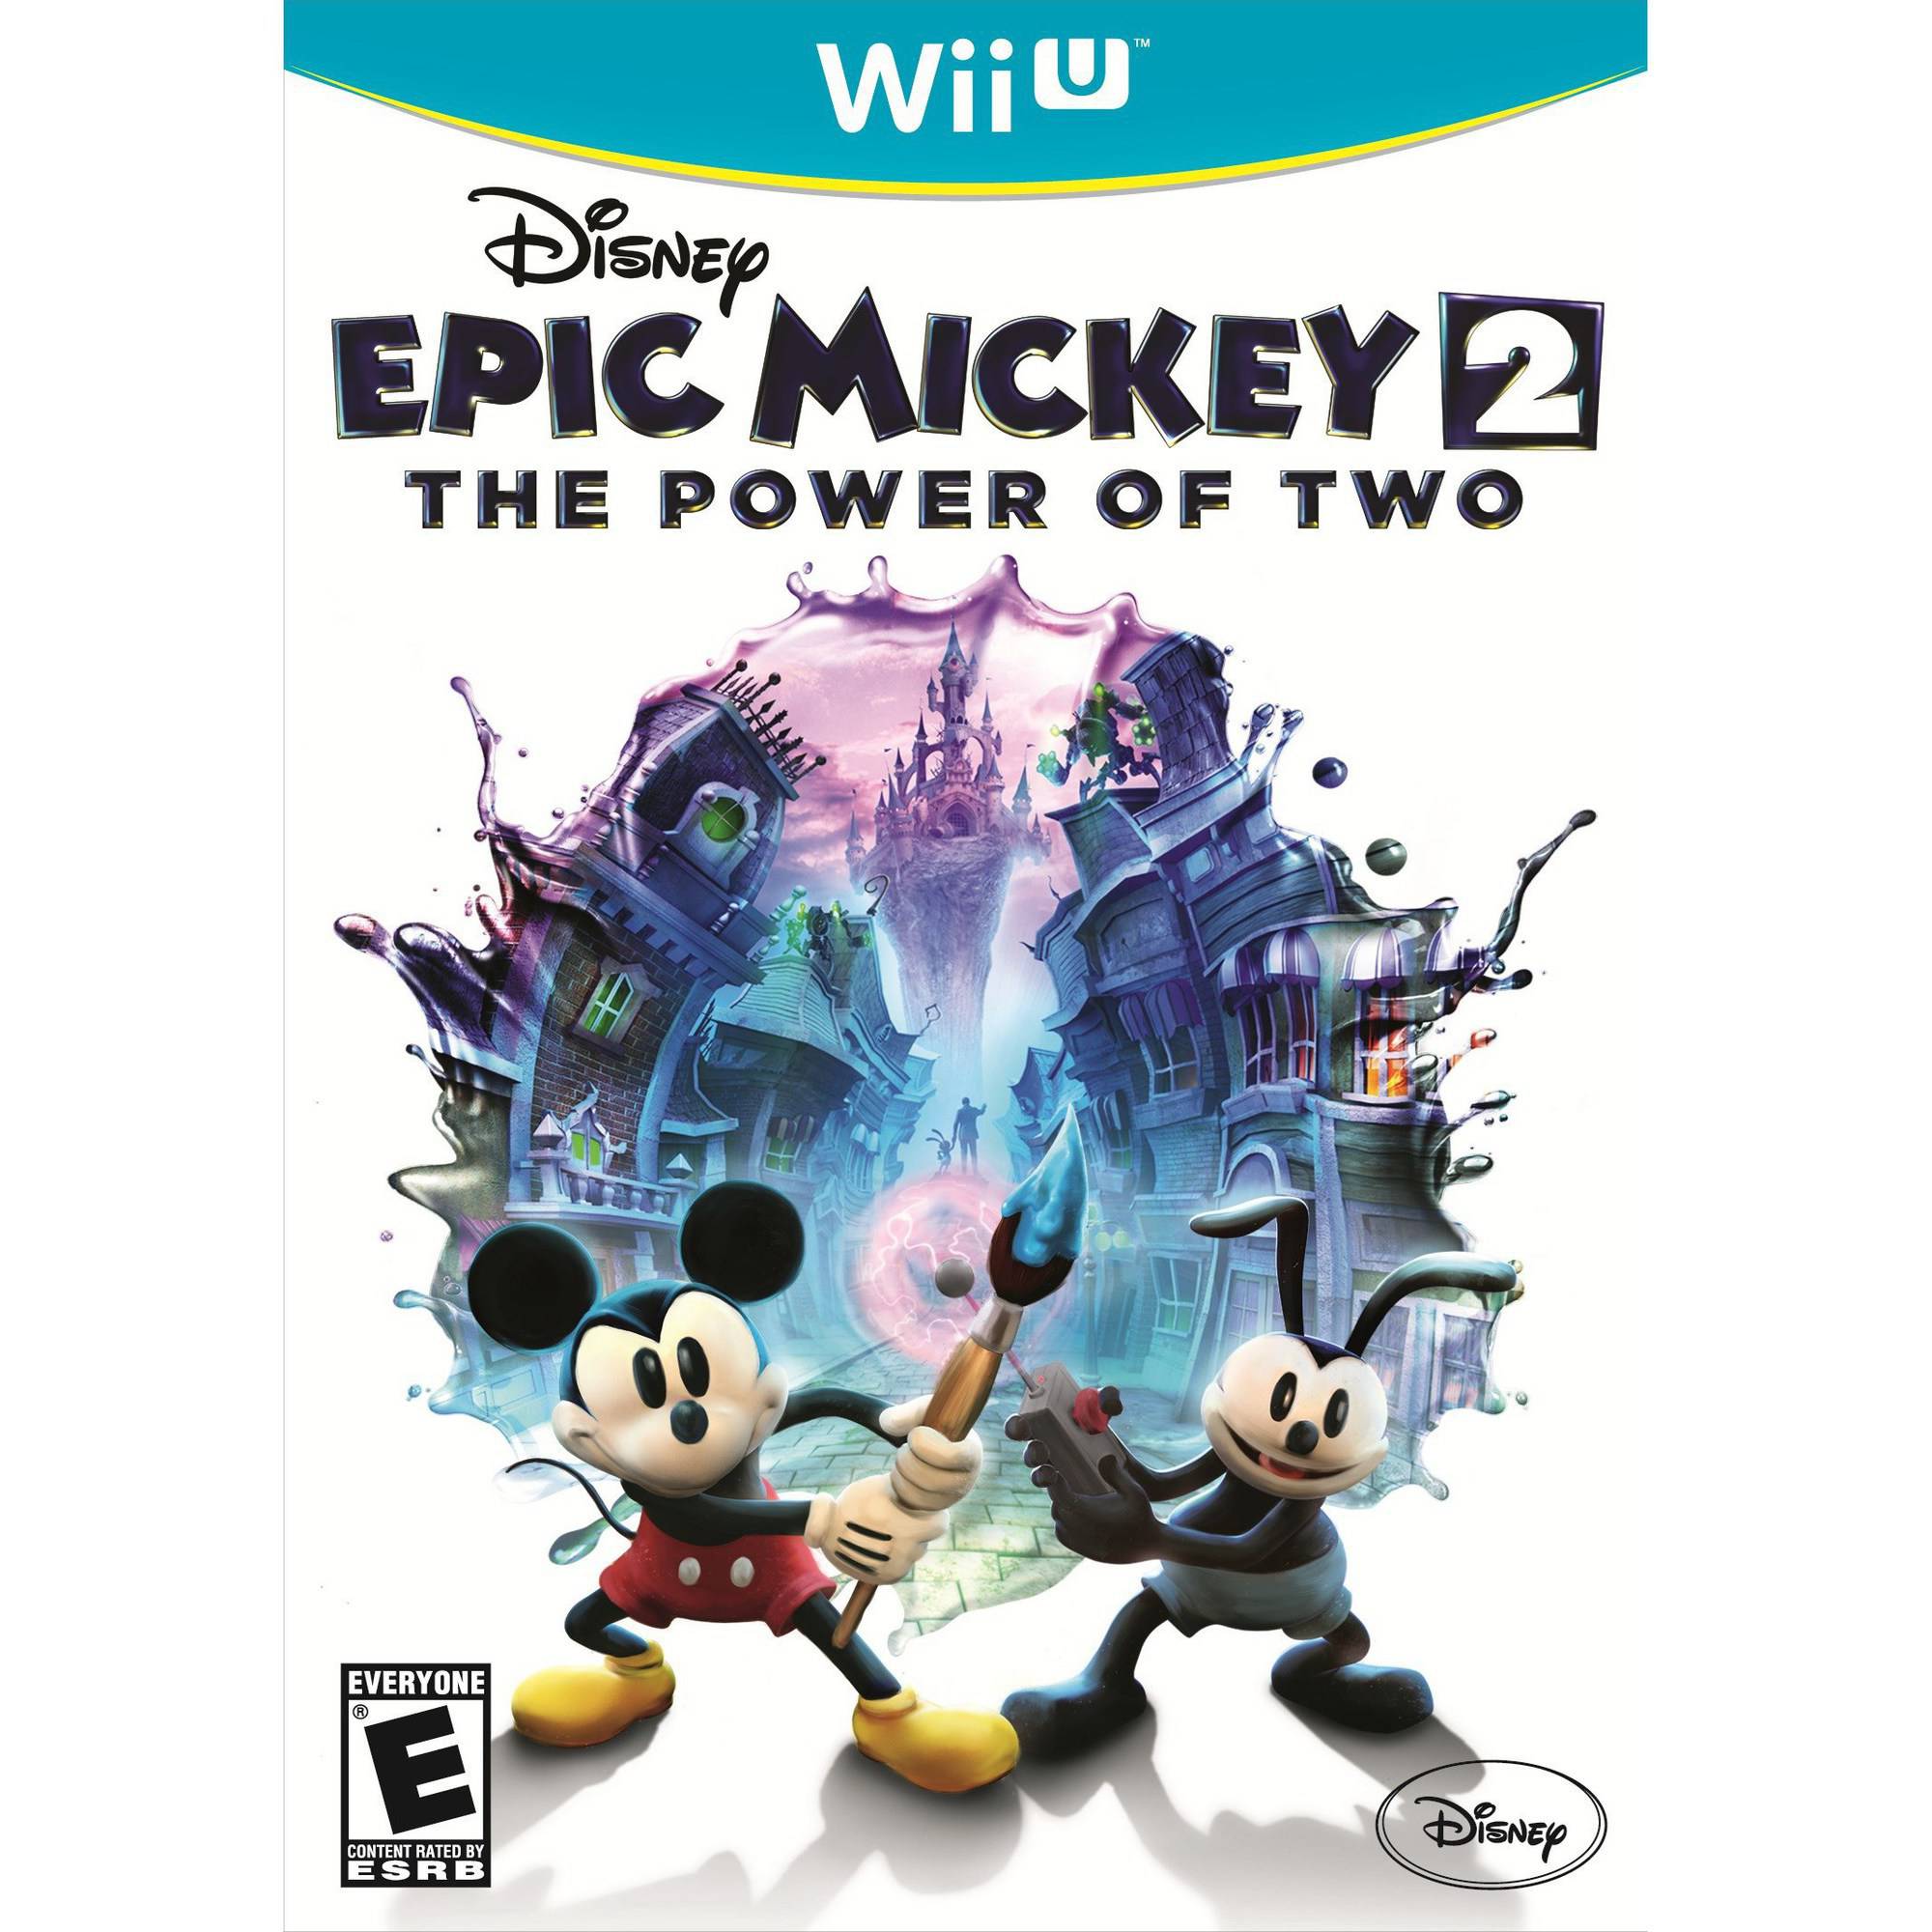 Epic Mickey 2 Power Of Two, Disney, 886162519778 (Nintendo Wii U) - Pre-Owned - image 5 of 5